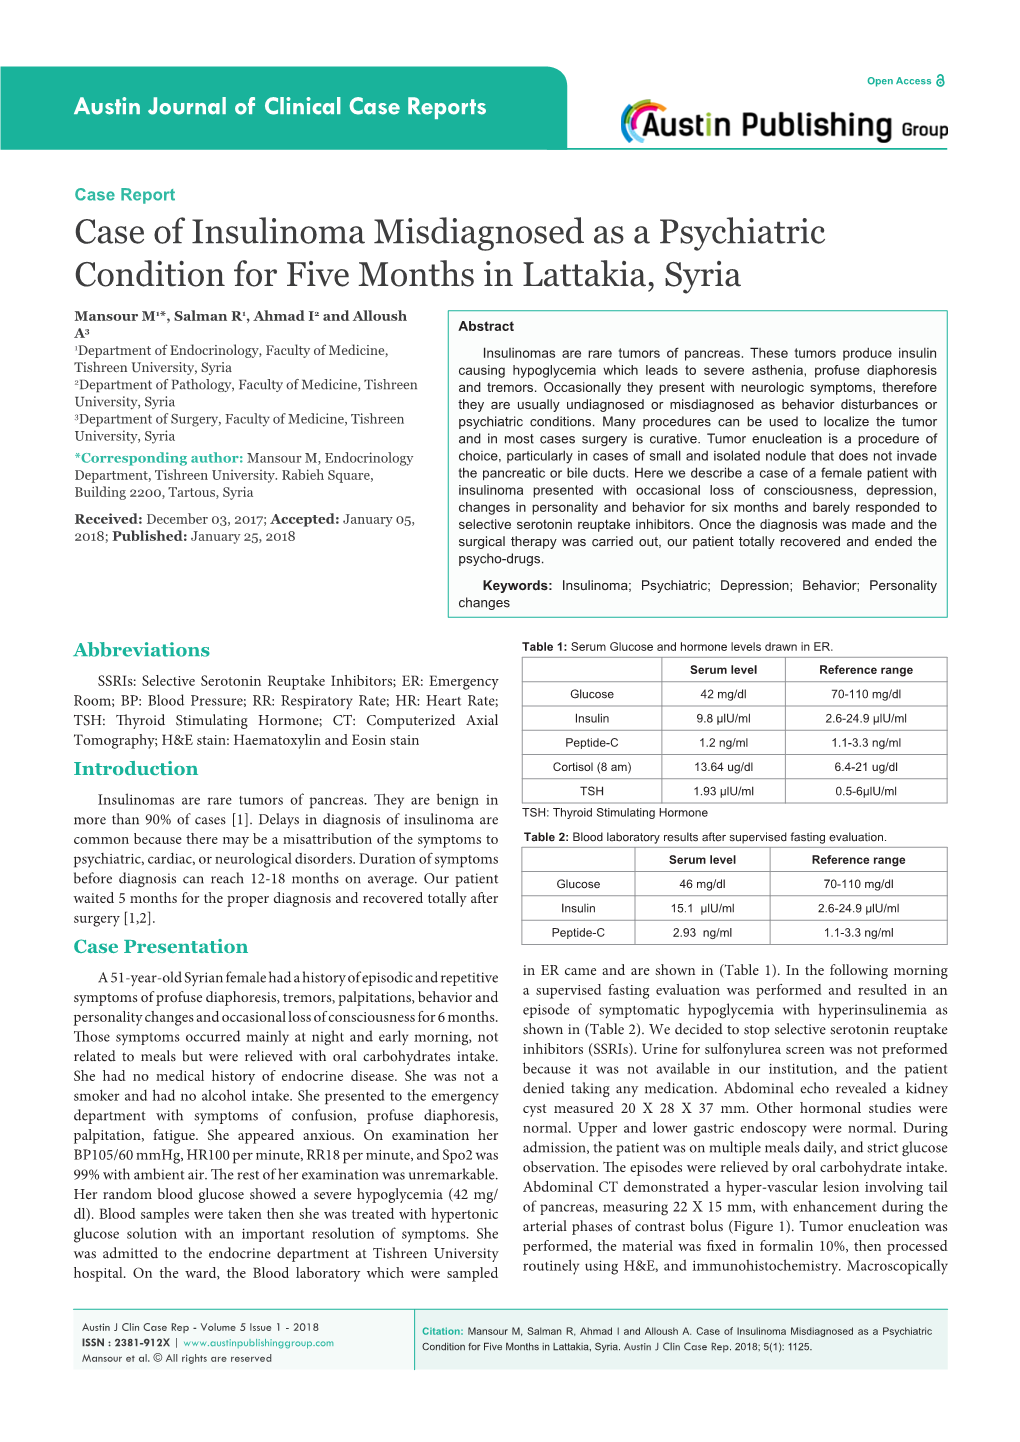 Case of Insulinoma Misdiagnosed As a Psychiatric Condition for Five Months in Lattakia, Syria